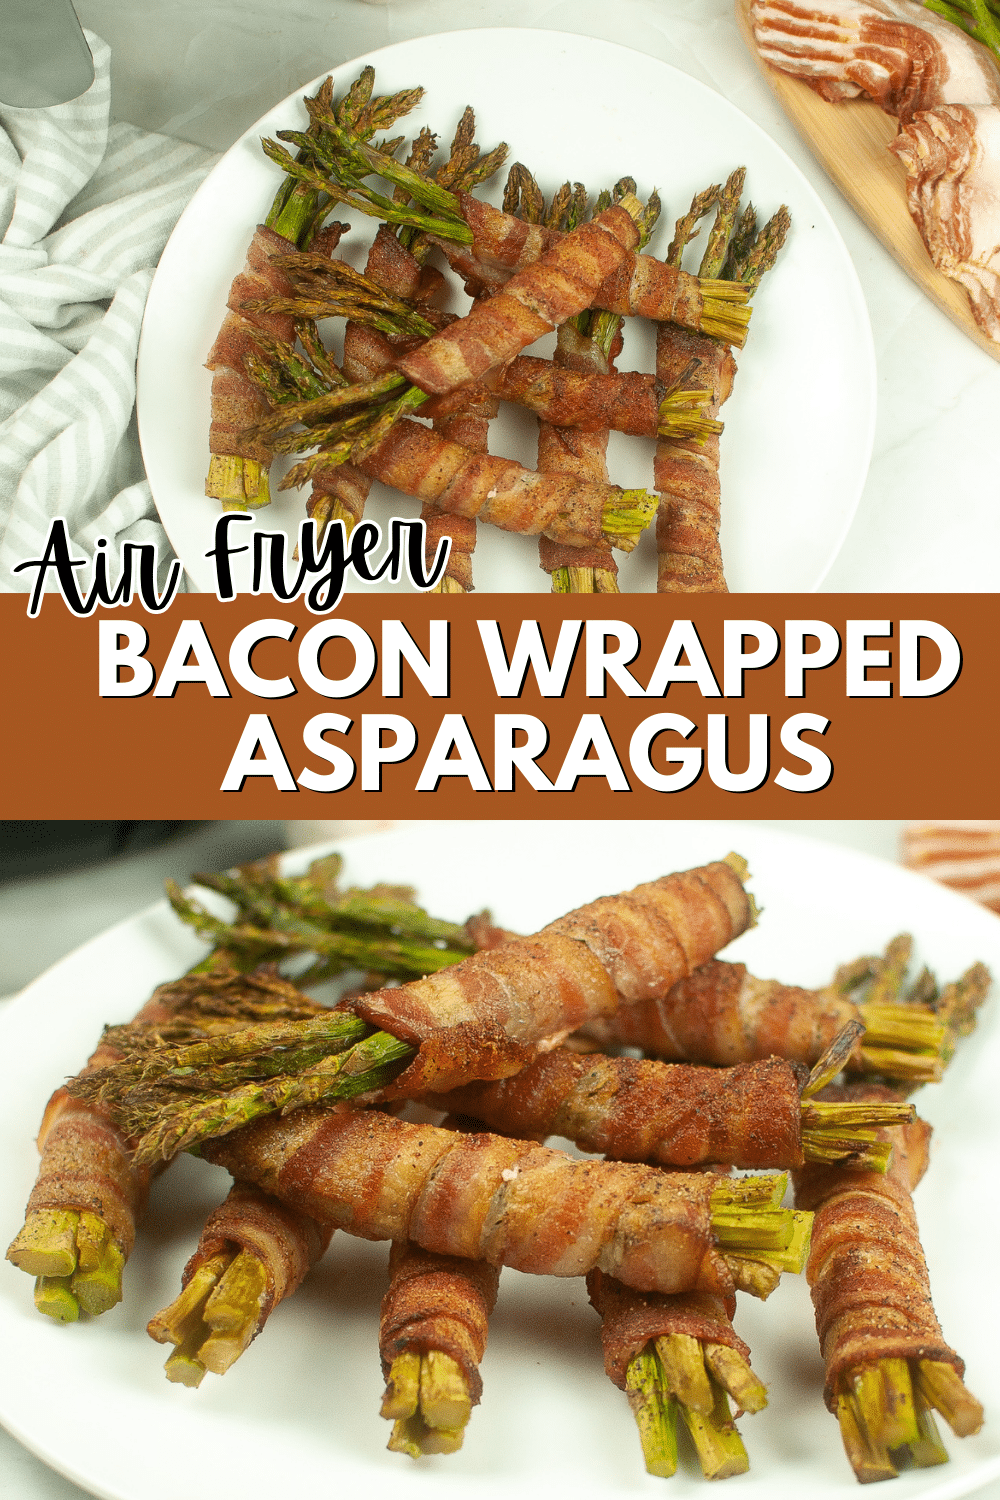 Bacon Wrapped Asparagus cooked in an Air Fryer.